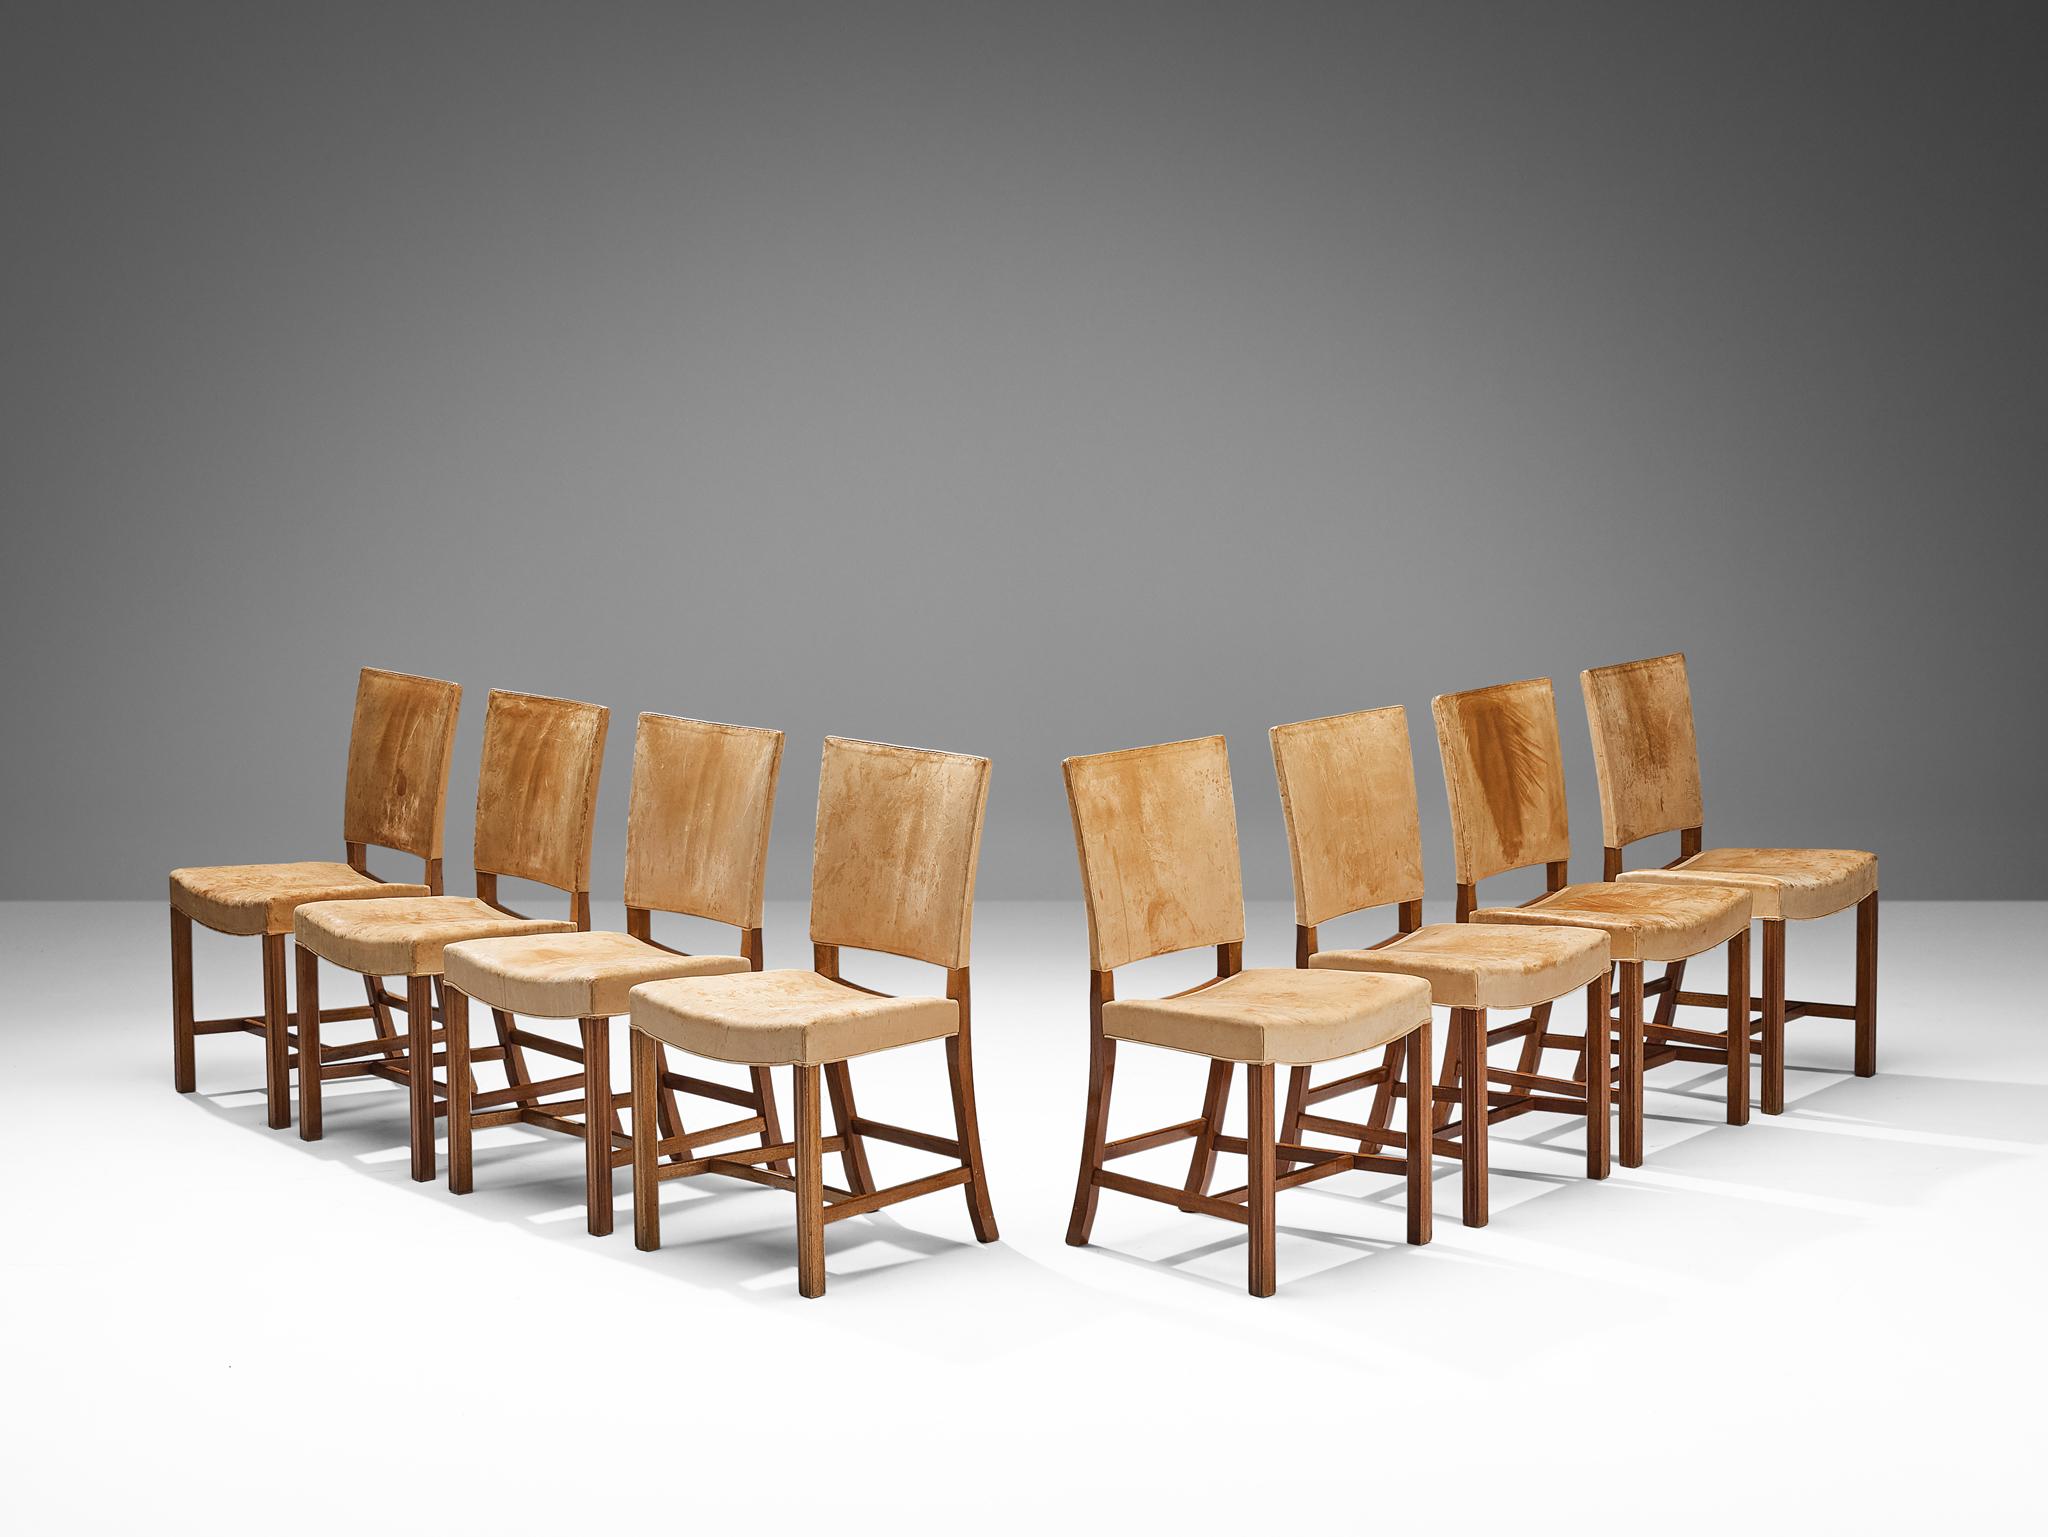 Kaare Klint for Rud Rasmussen, set of 10 dining chairs, 'The Red Chair', model 3949, original patinated leather, mahogany, Denmark, designed 1928, manufactured 1960s.

These dining chairs in camel leather upholstery are designed in 1928 and